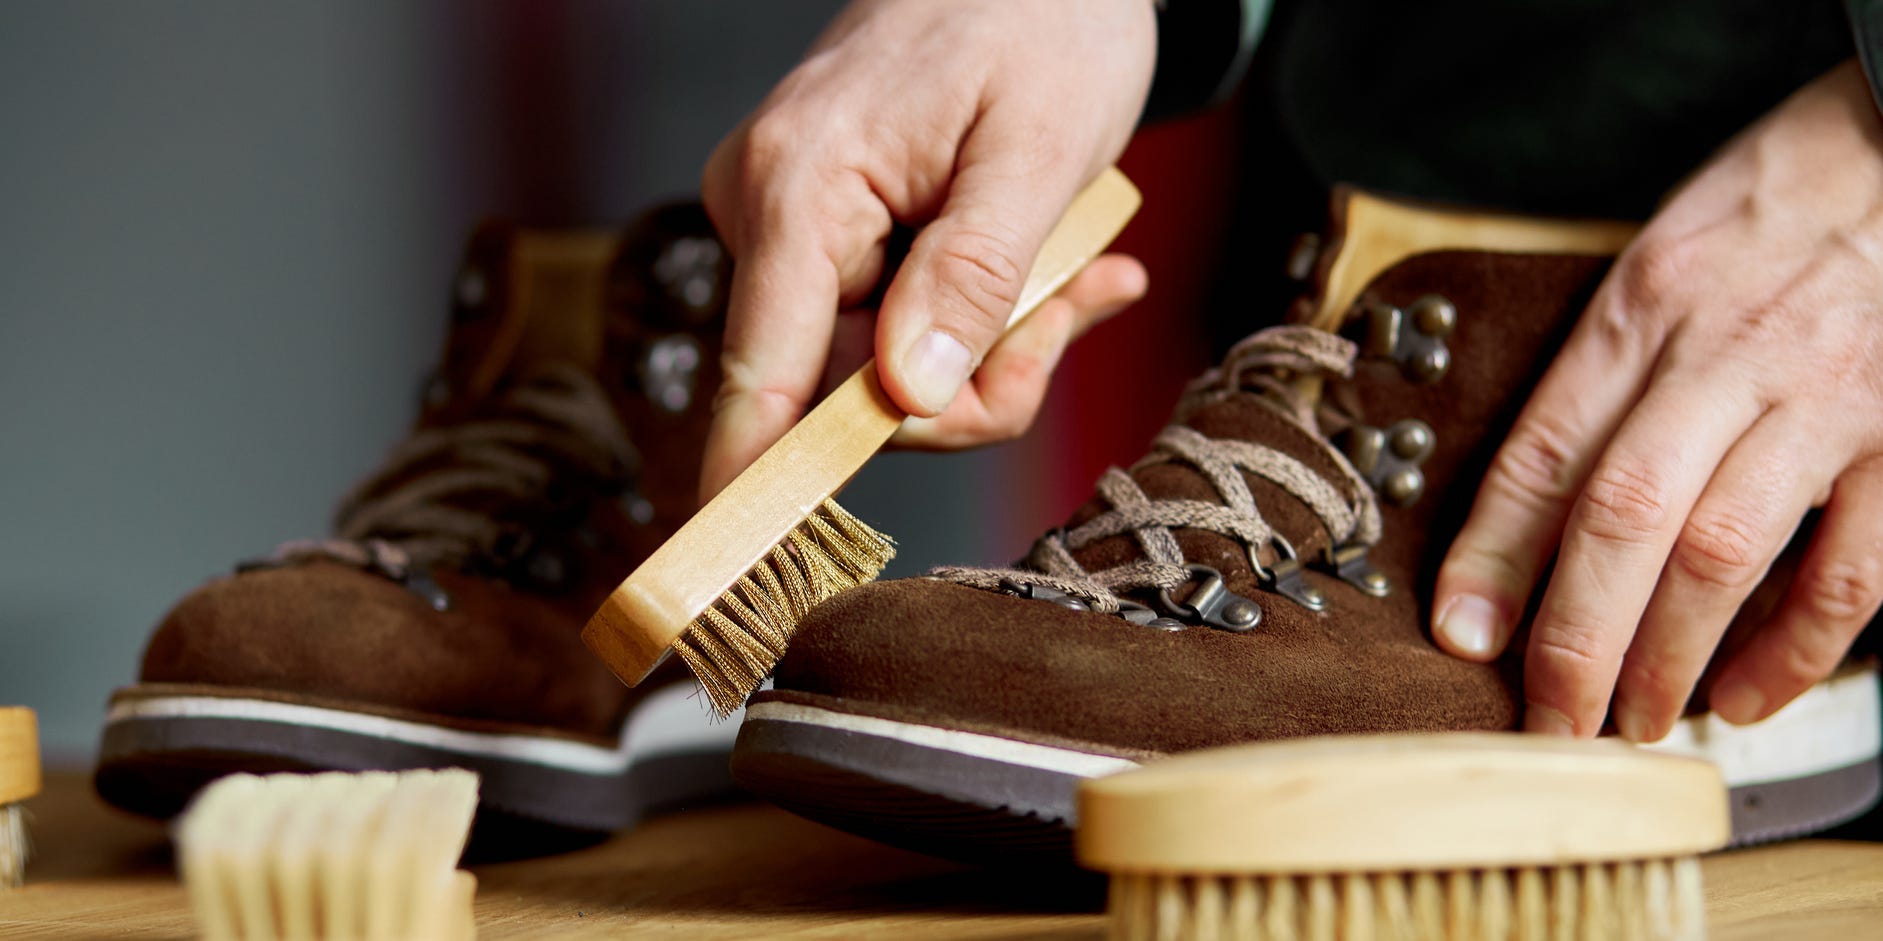 How to clean and remove dirt, oil, and other stains from suede shoes